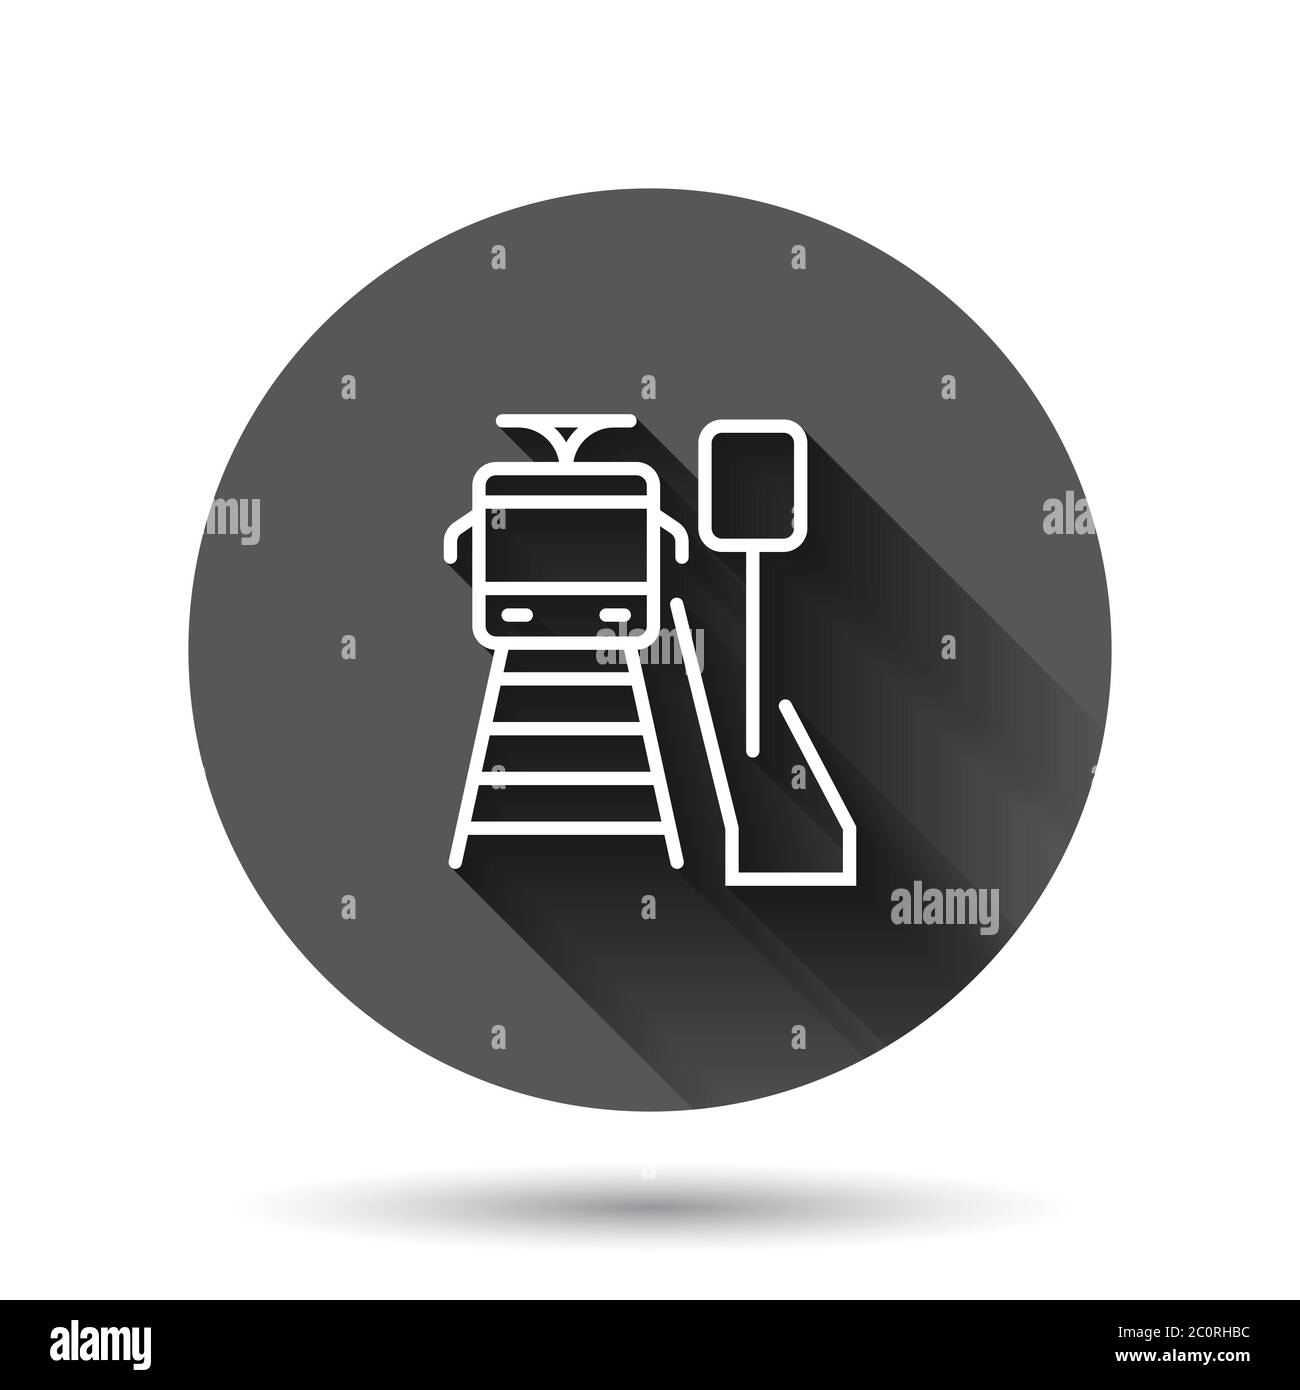 Metro station icon in flat style. Train subway vector illustration on black round background with long shadow effect. Railroad cargo circle button bus Stock Vector